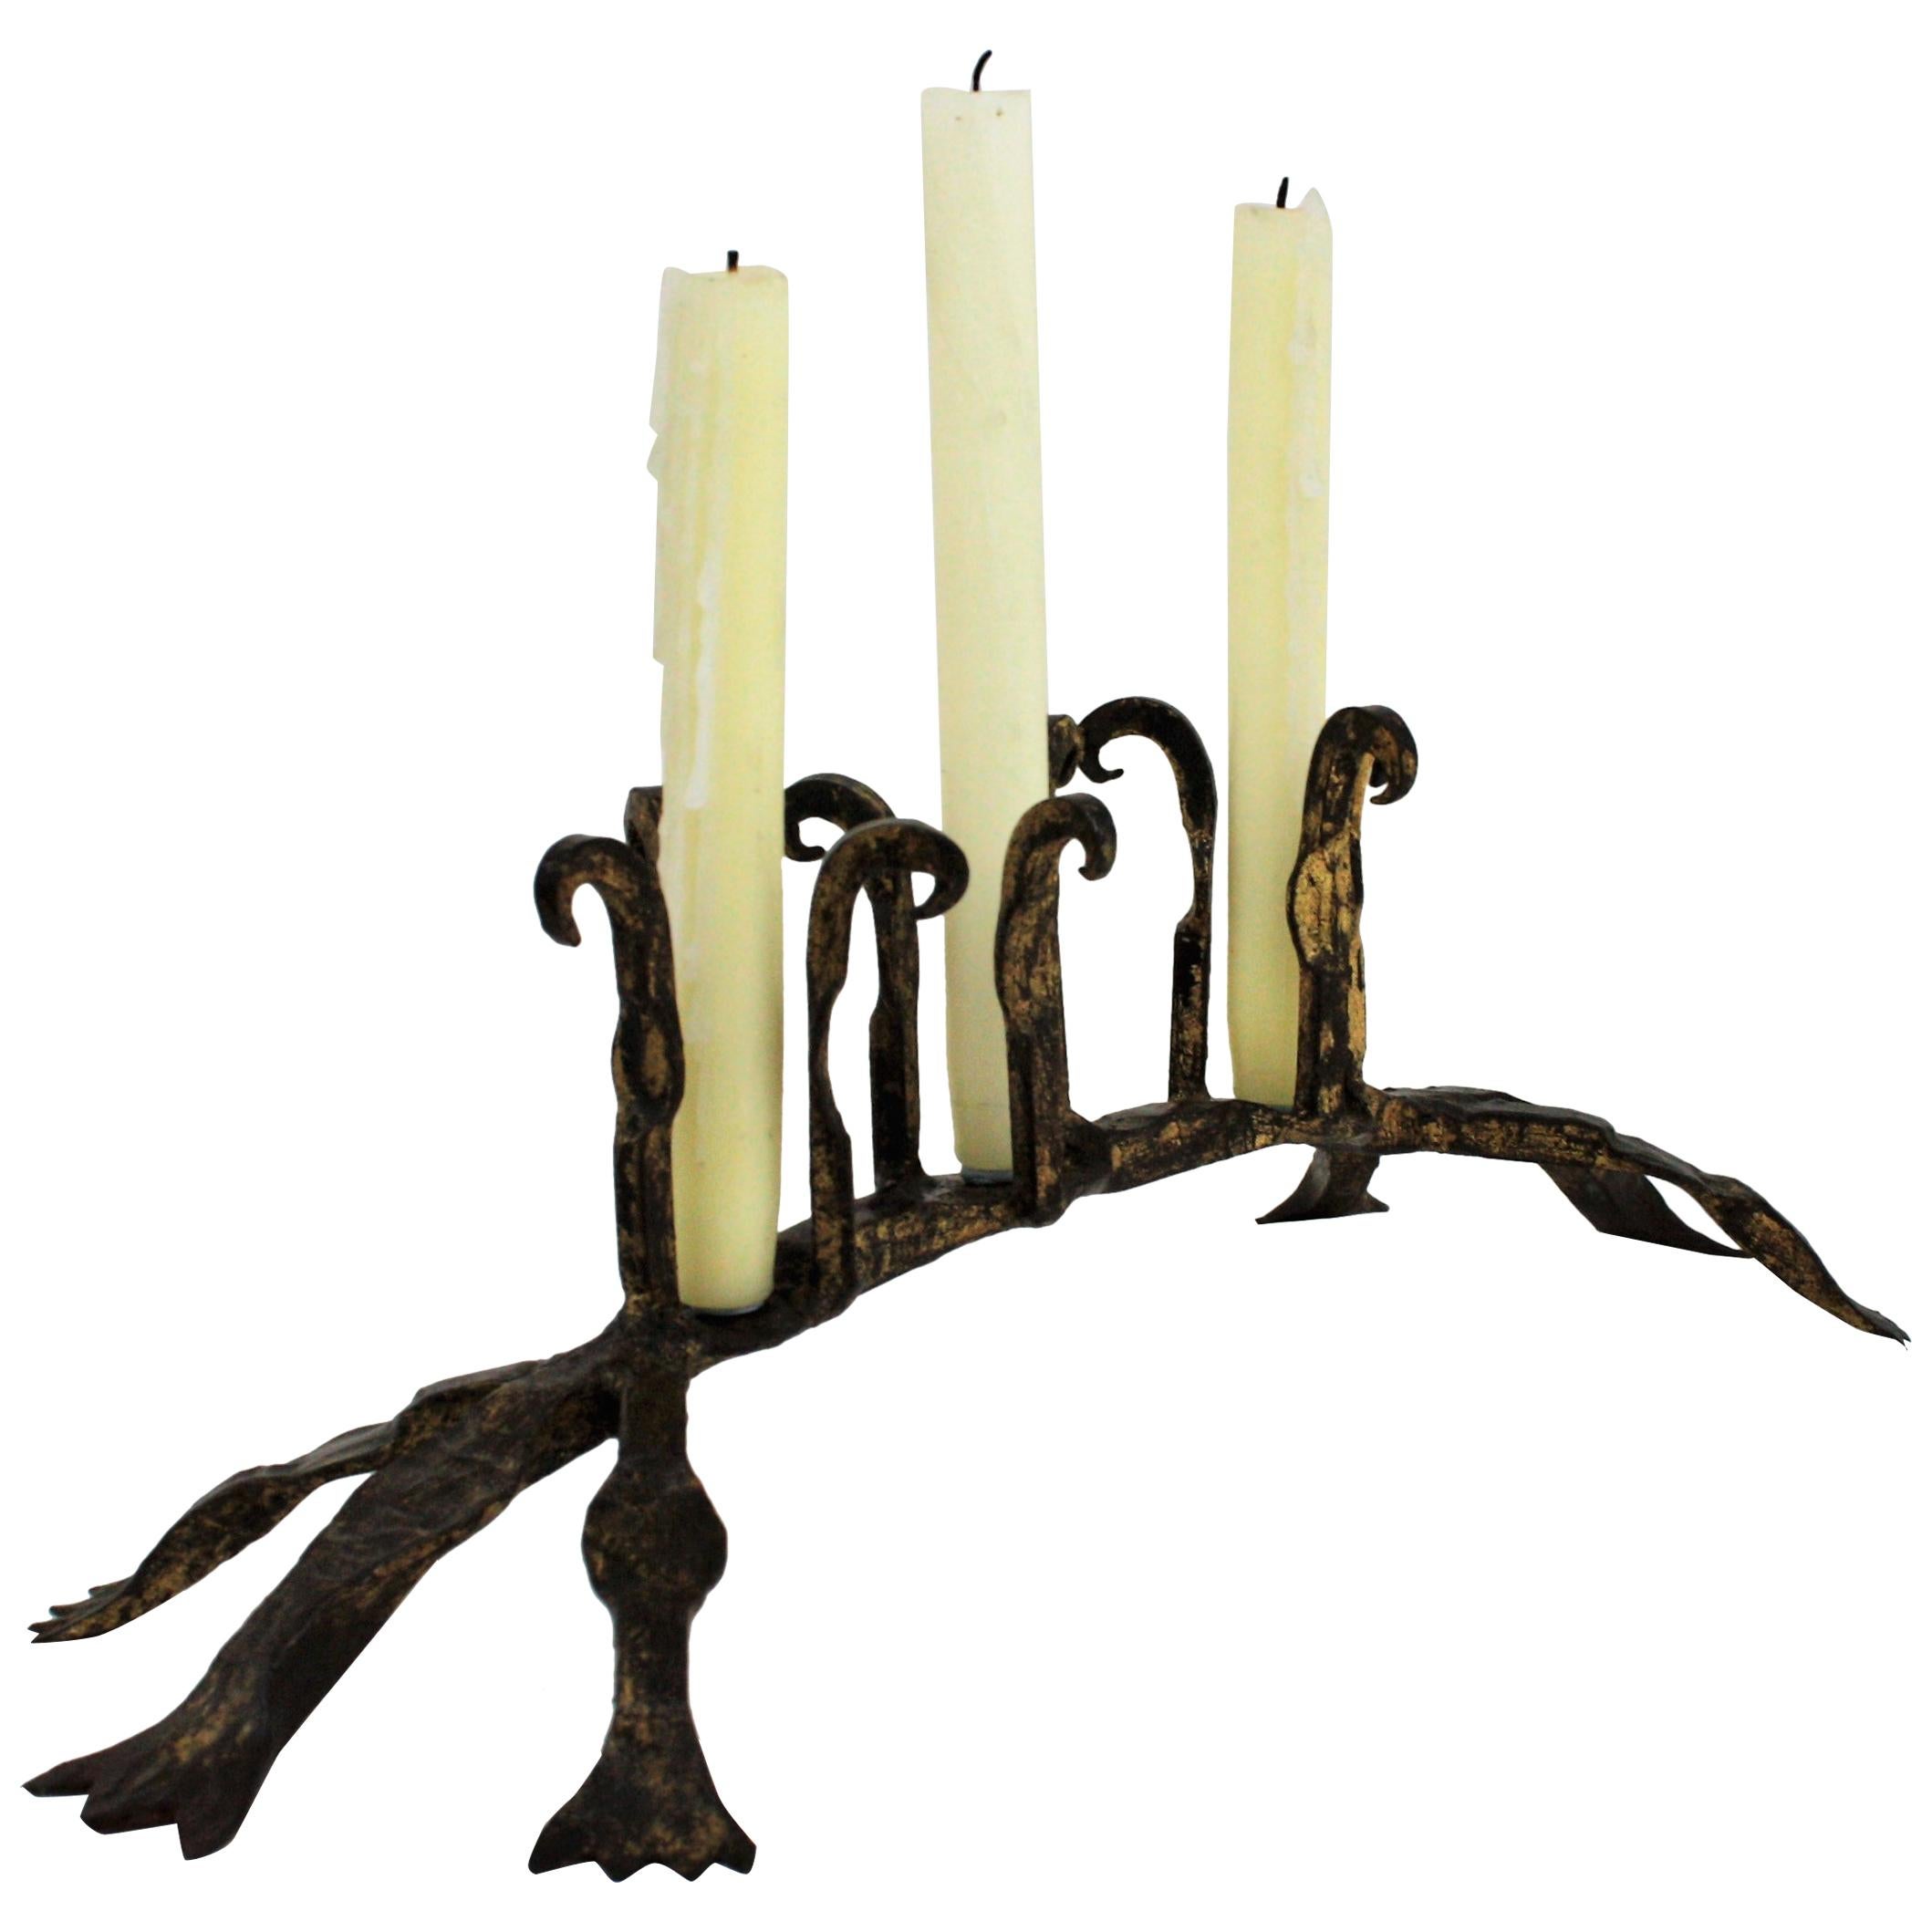 Hand Forged Iron Candle Holder in Medieval Style